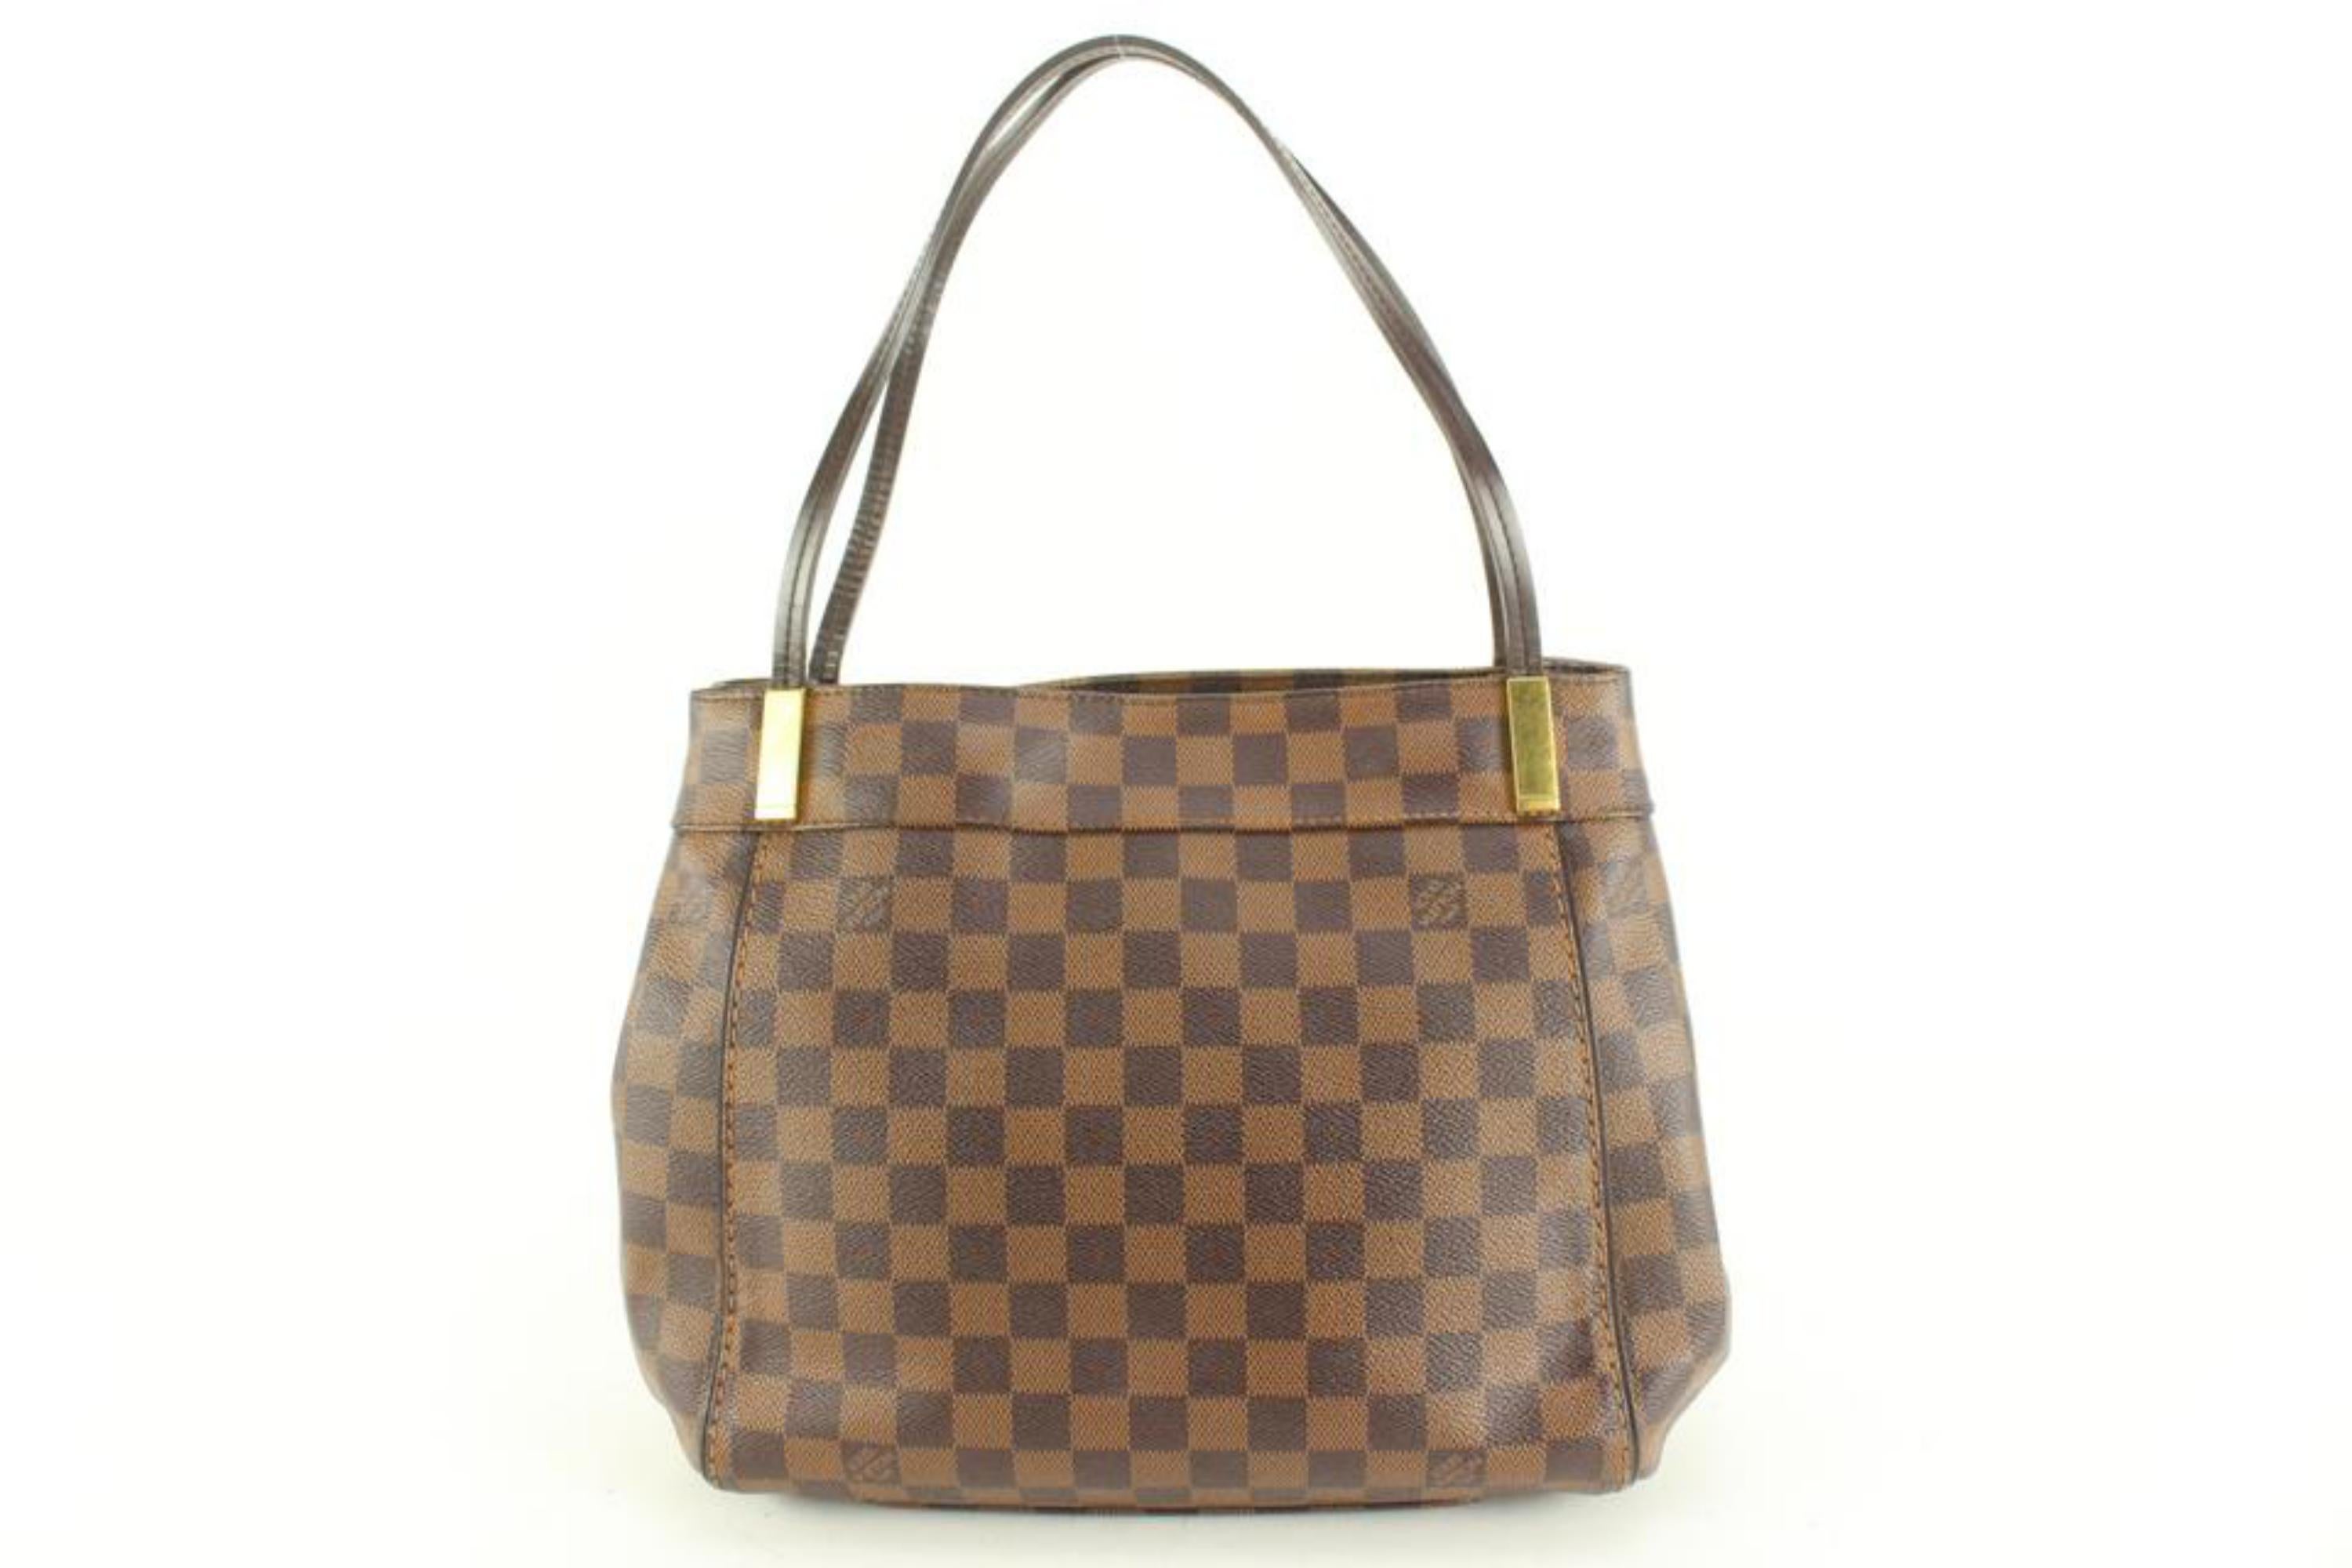 Louis Vuitton Damier Ebene Marylebone PM Shoulder Bag Tote 39lk427s In Good Condition For Sale In Dix hills, NY